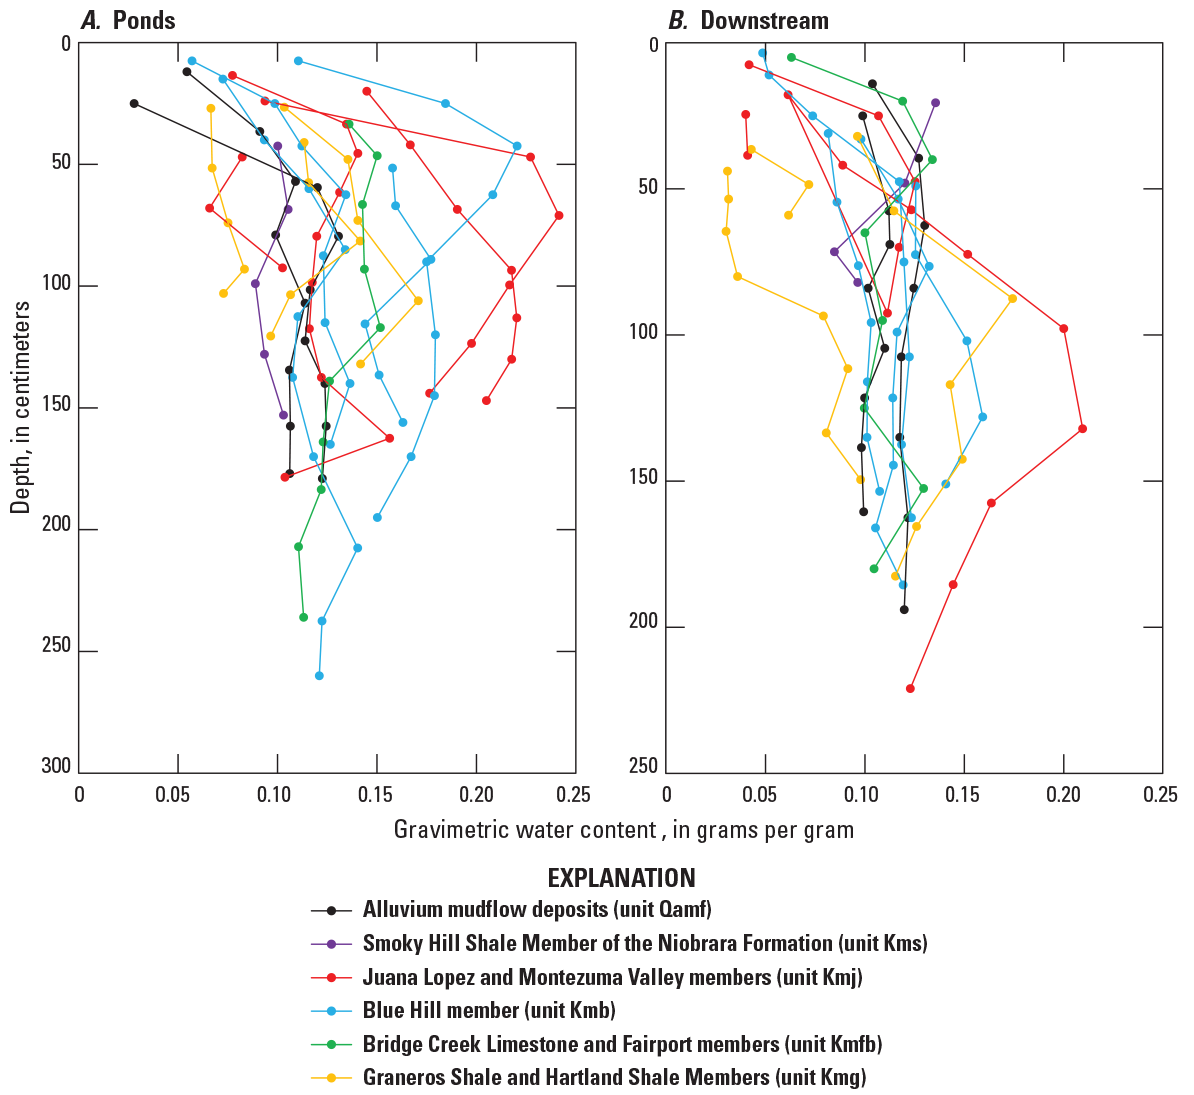 Figure 6.	Dots with lines connecting them depict gravimetric water content in samples
                        relative to depth. Different colors indicate different geologic units.